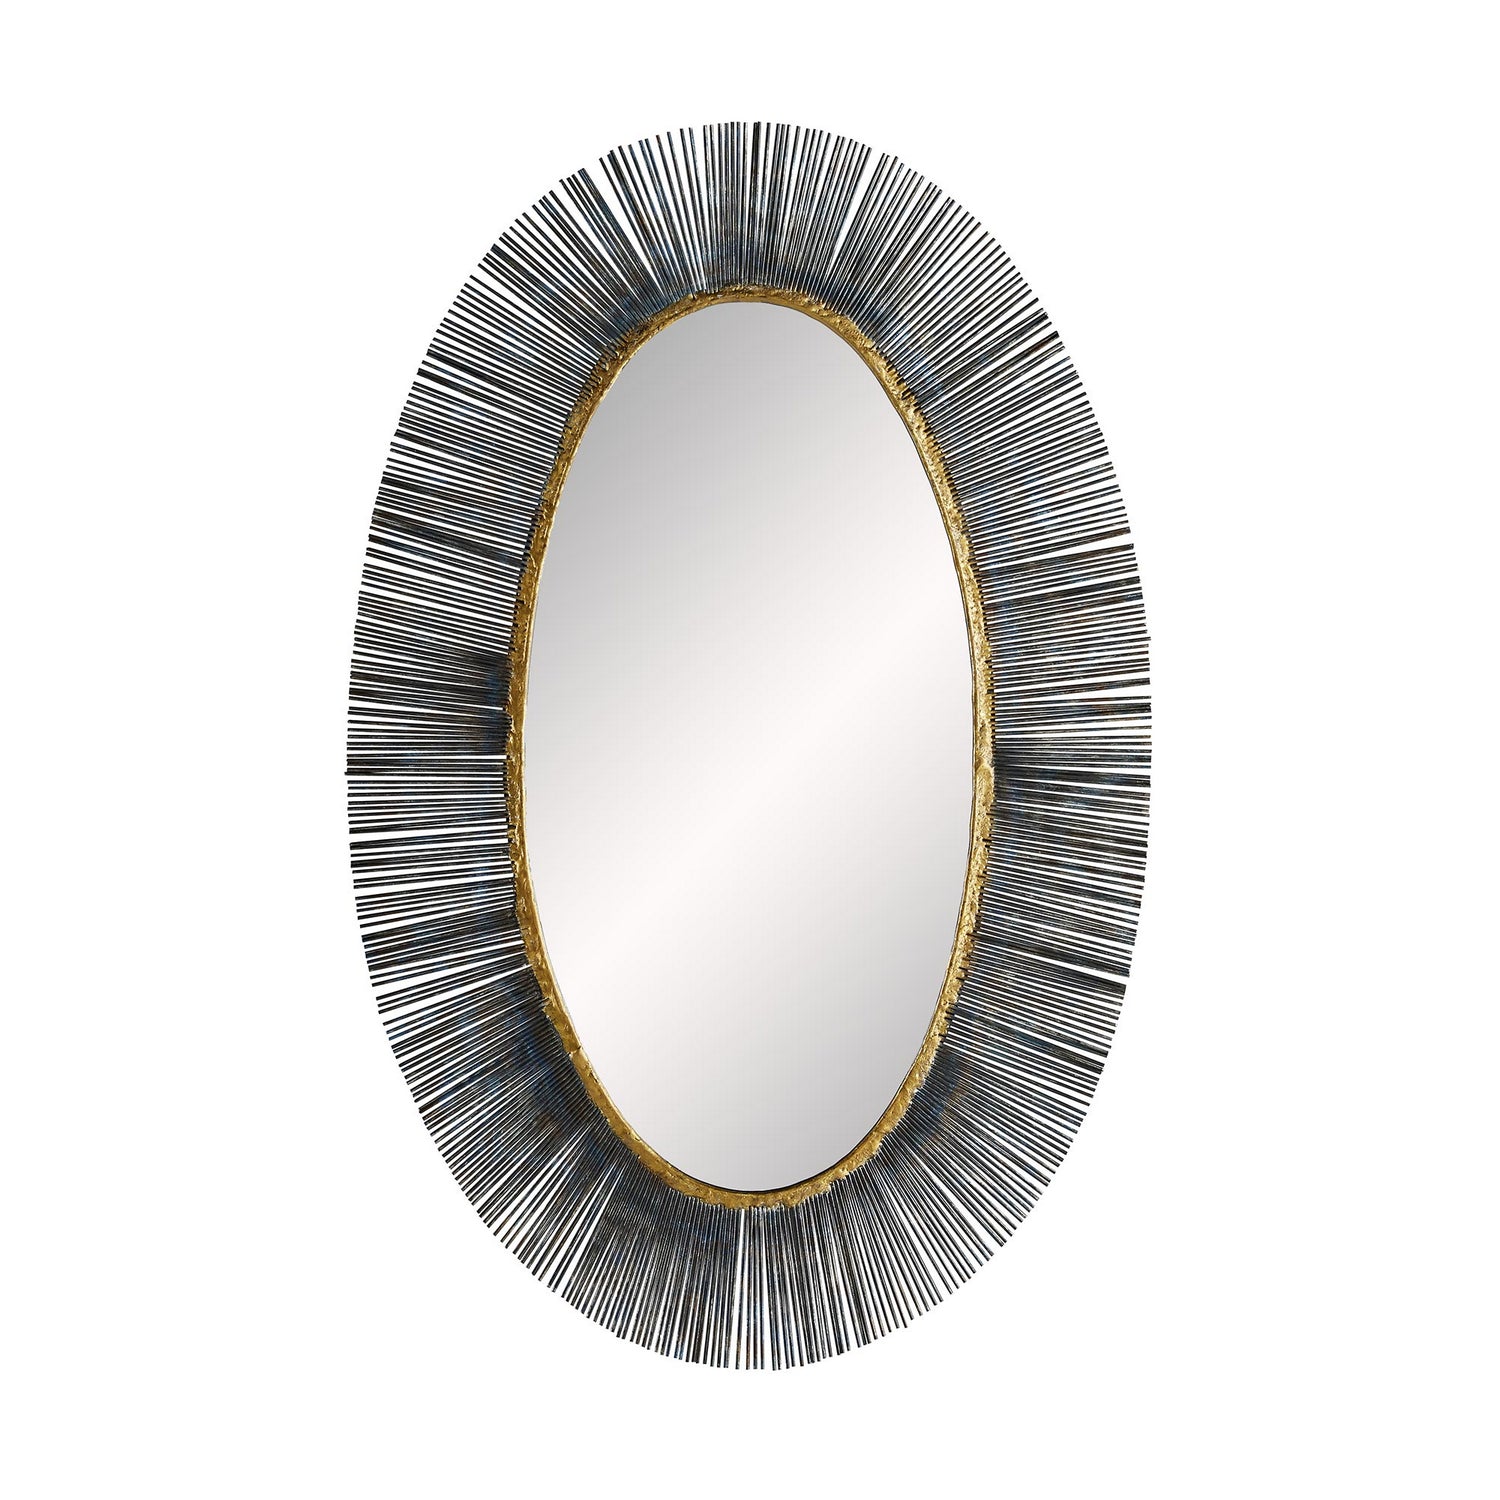 Mirror from the Perseus collection in Natural Iron finish